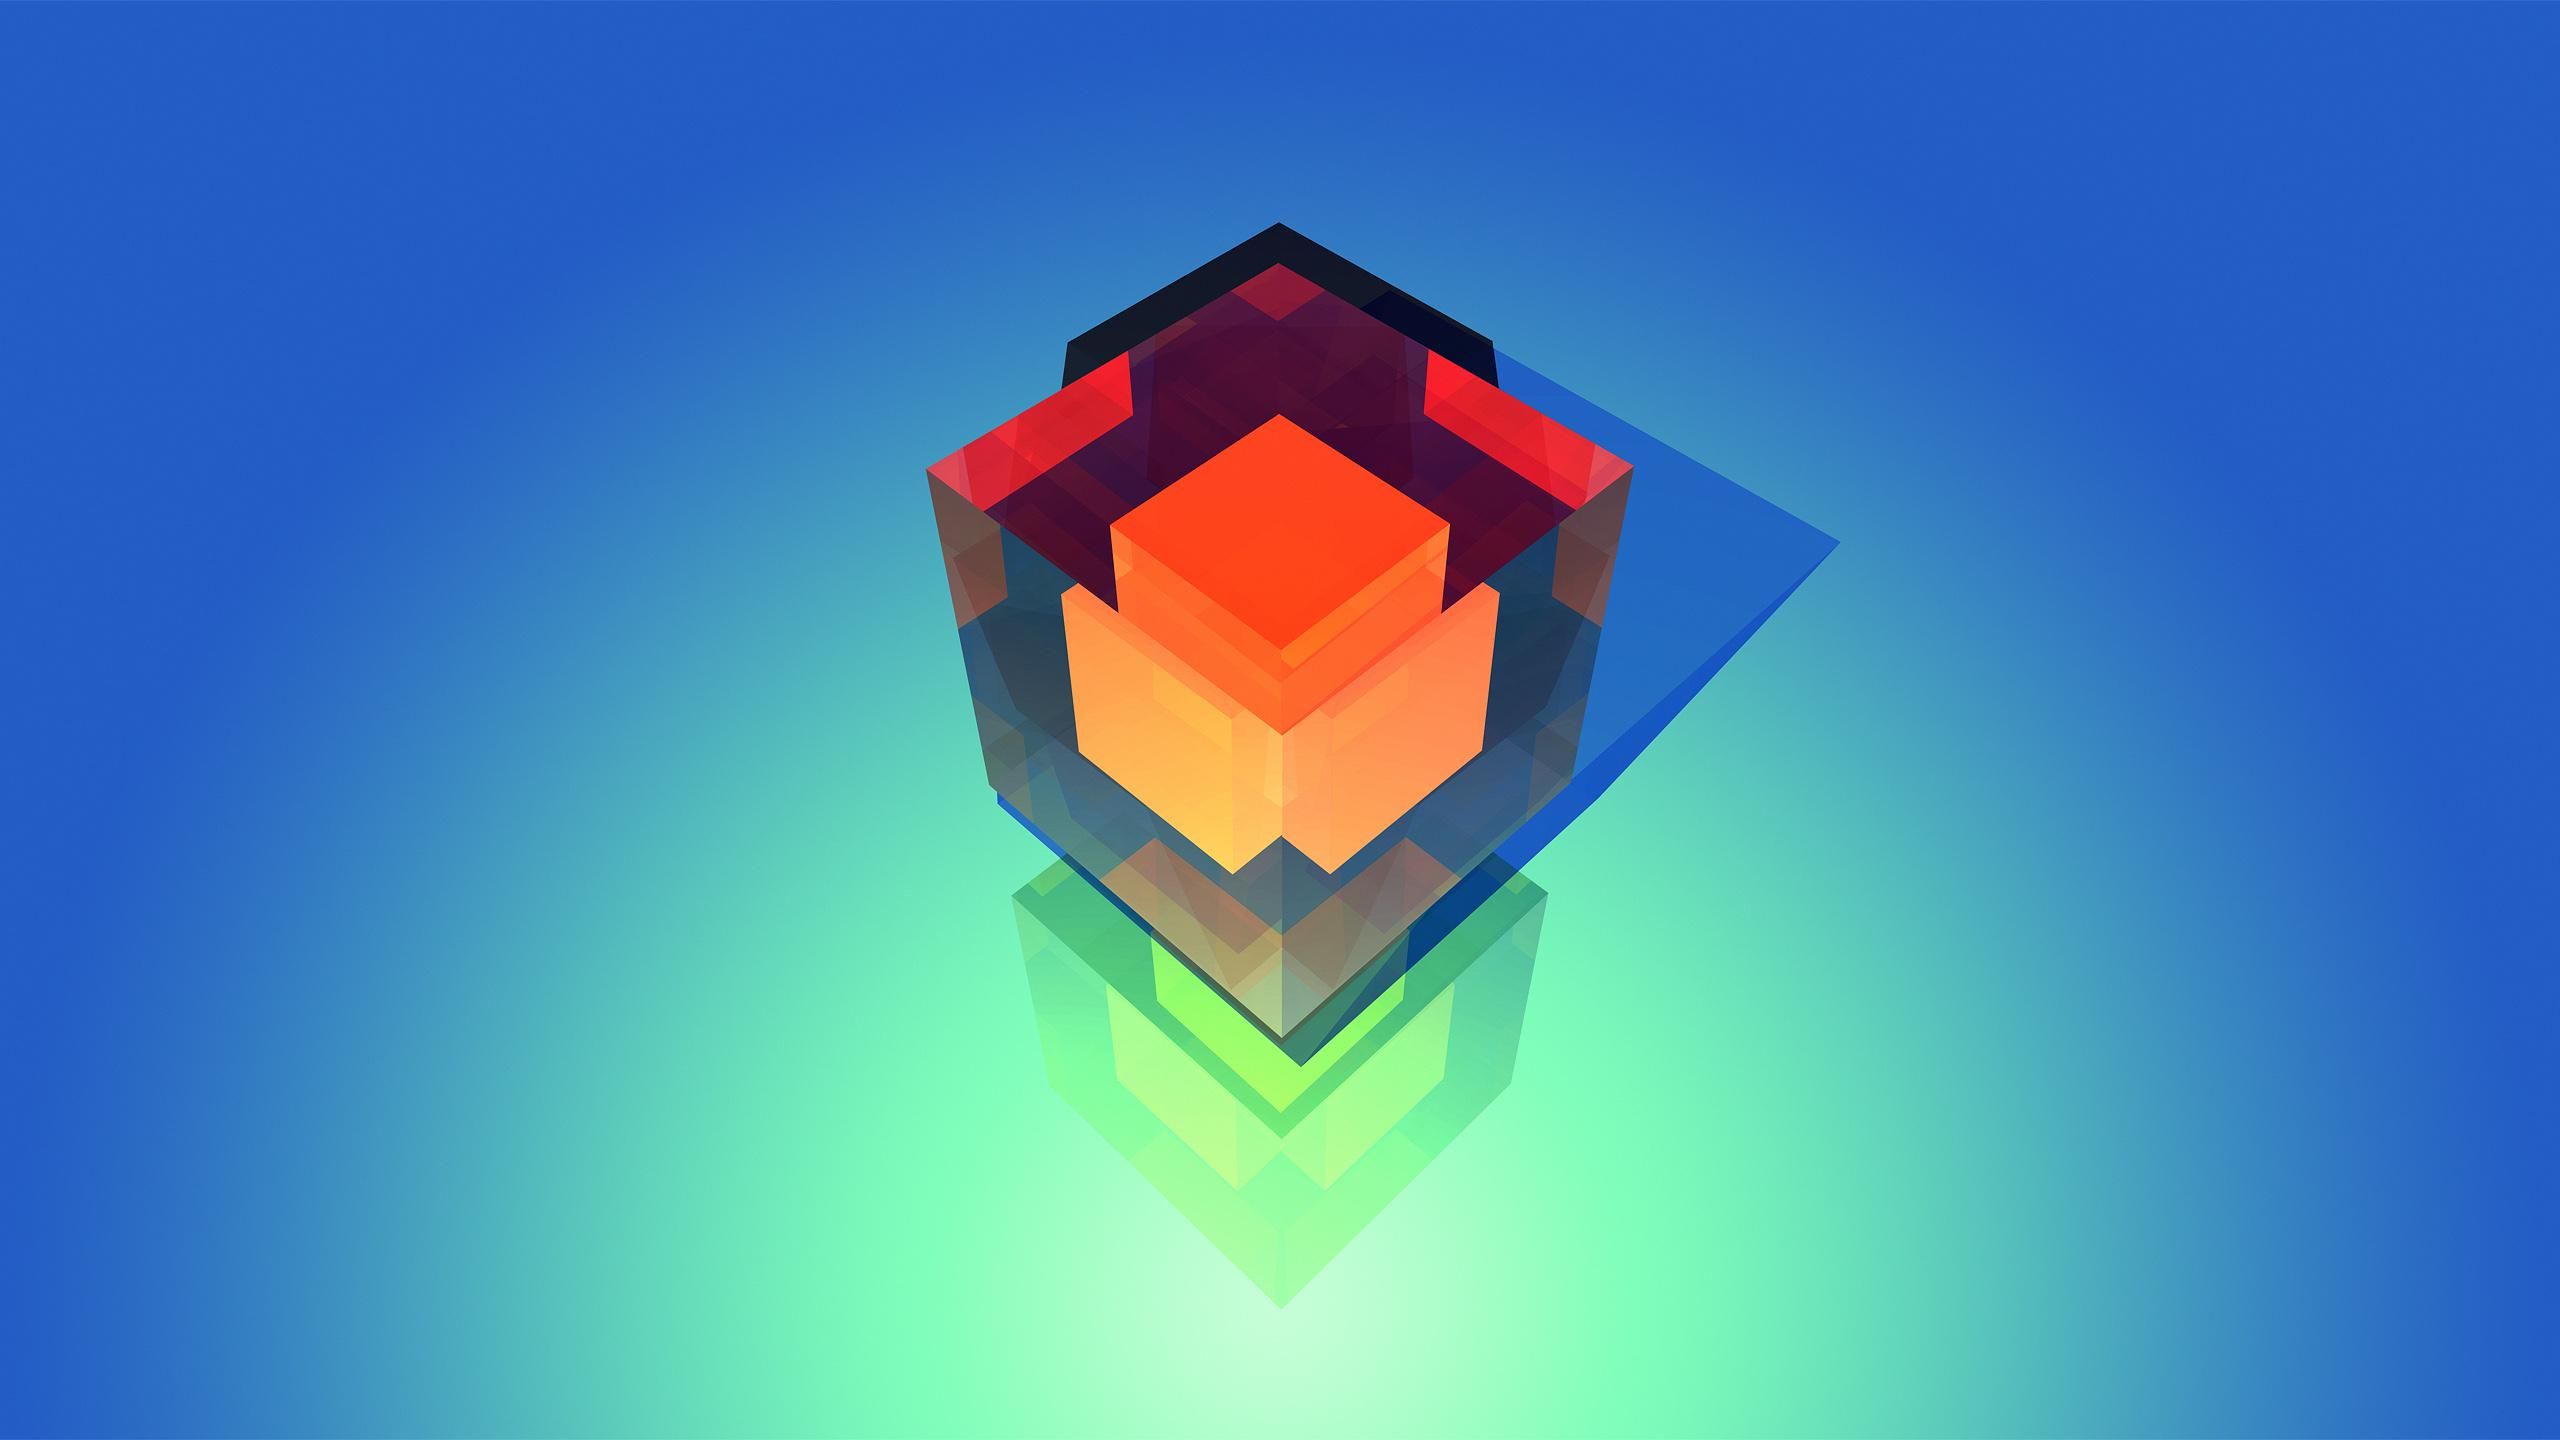 Simple Things. Abstract (2880x1440) by Justin Maller. Justin maller wallpaper, 4k gaming wallpaper, Gaming wallpaper